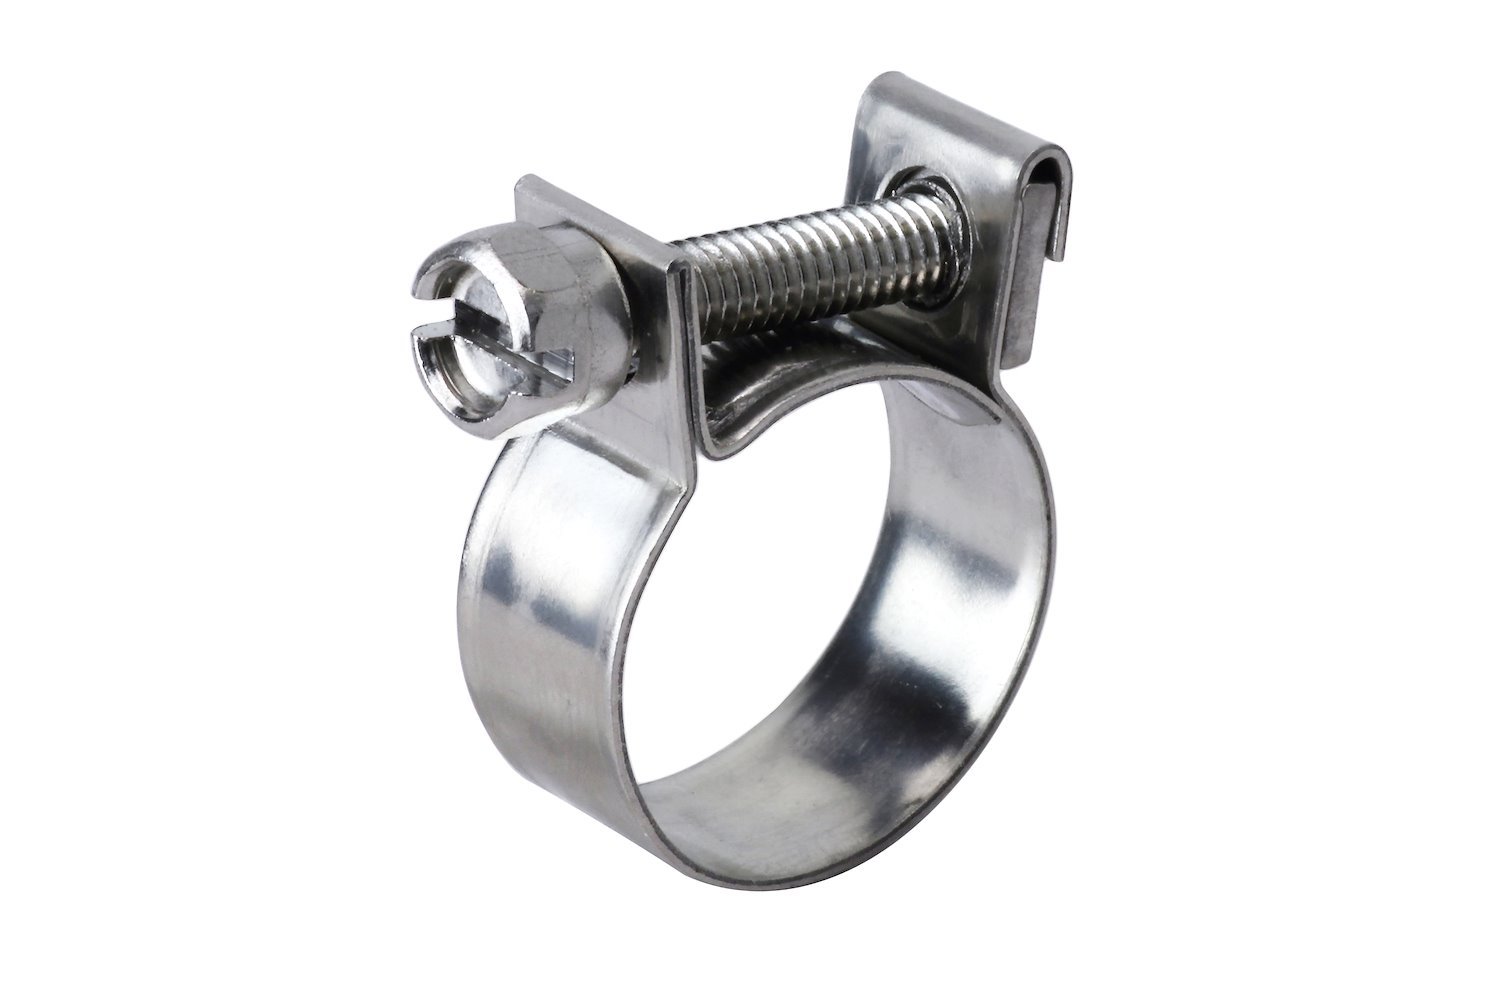 FIC-8 Fuel Injection Hose Clamp, Stainless Steel Small Hose Clamp, SAE Size 10, 5/16 in. - 25/64 in. (8 mm-10 mm)